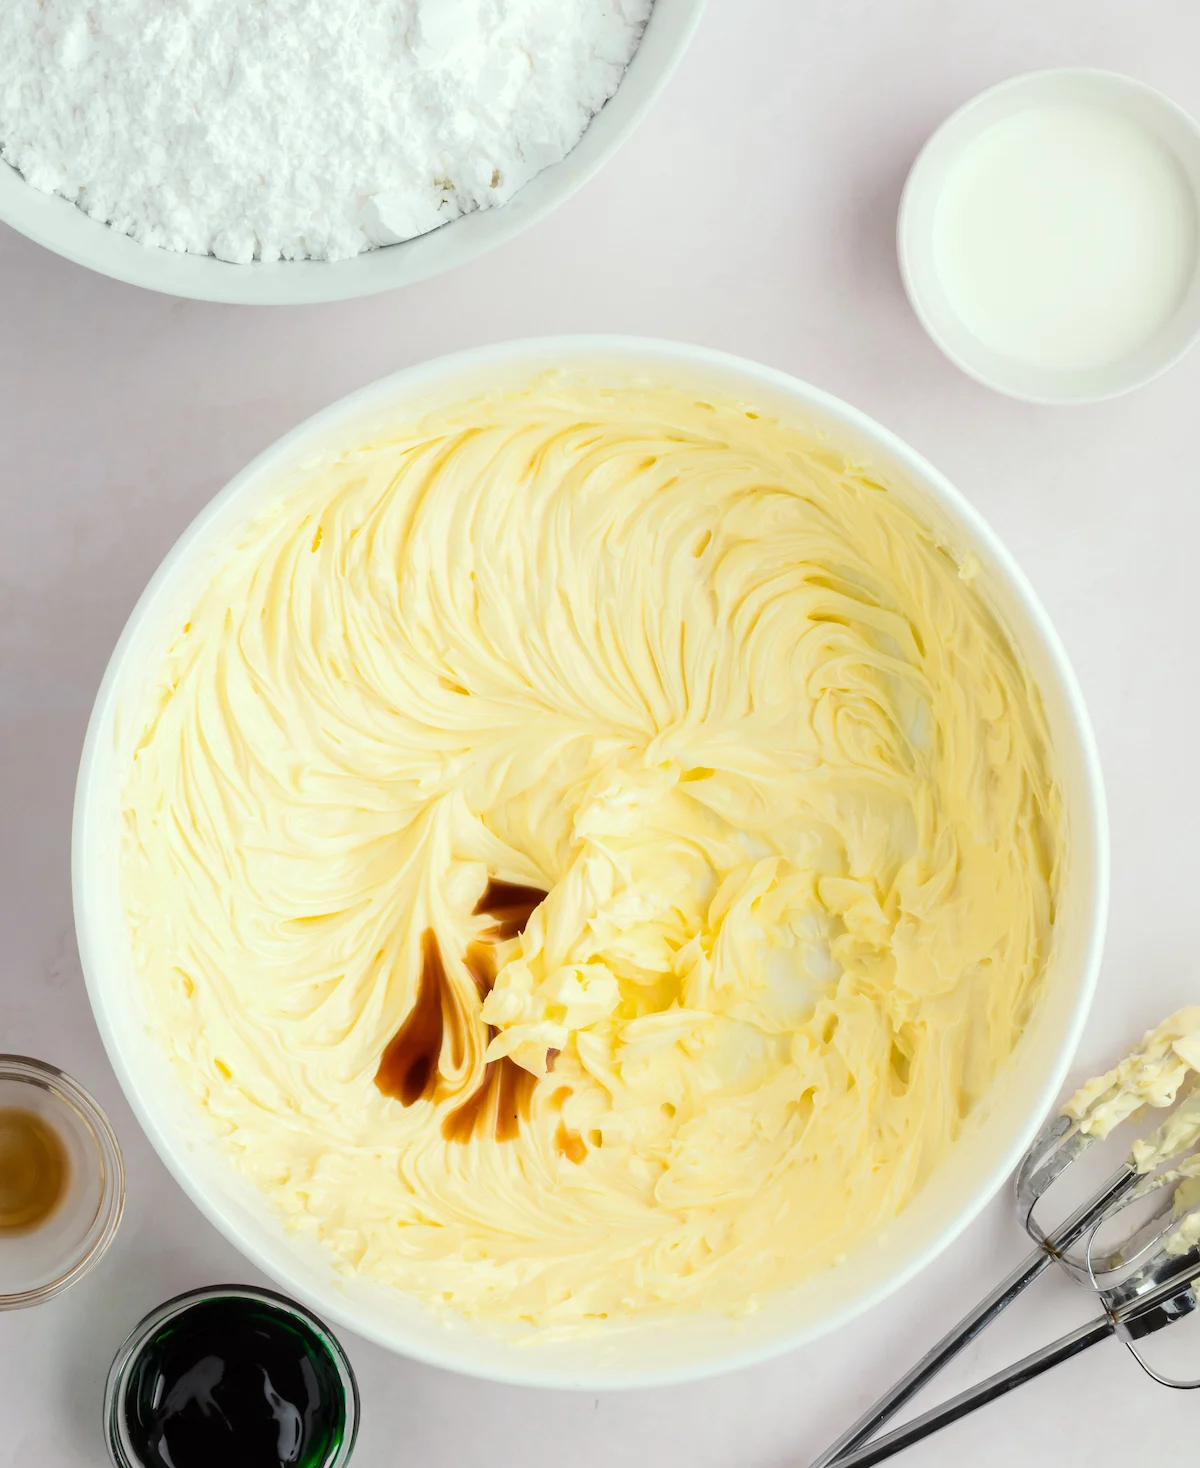 Vanilla extract added to creamed butter in a white ceramic bowl